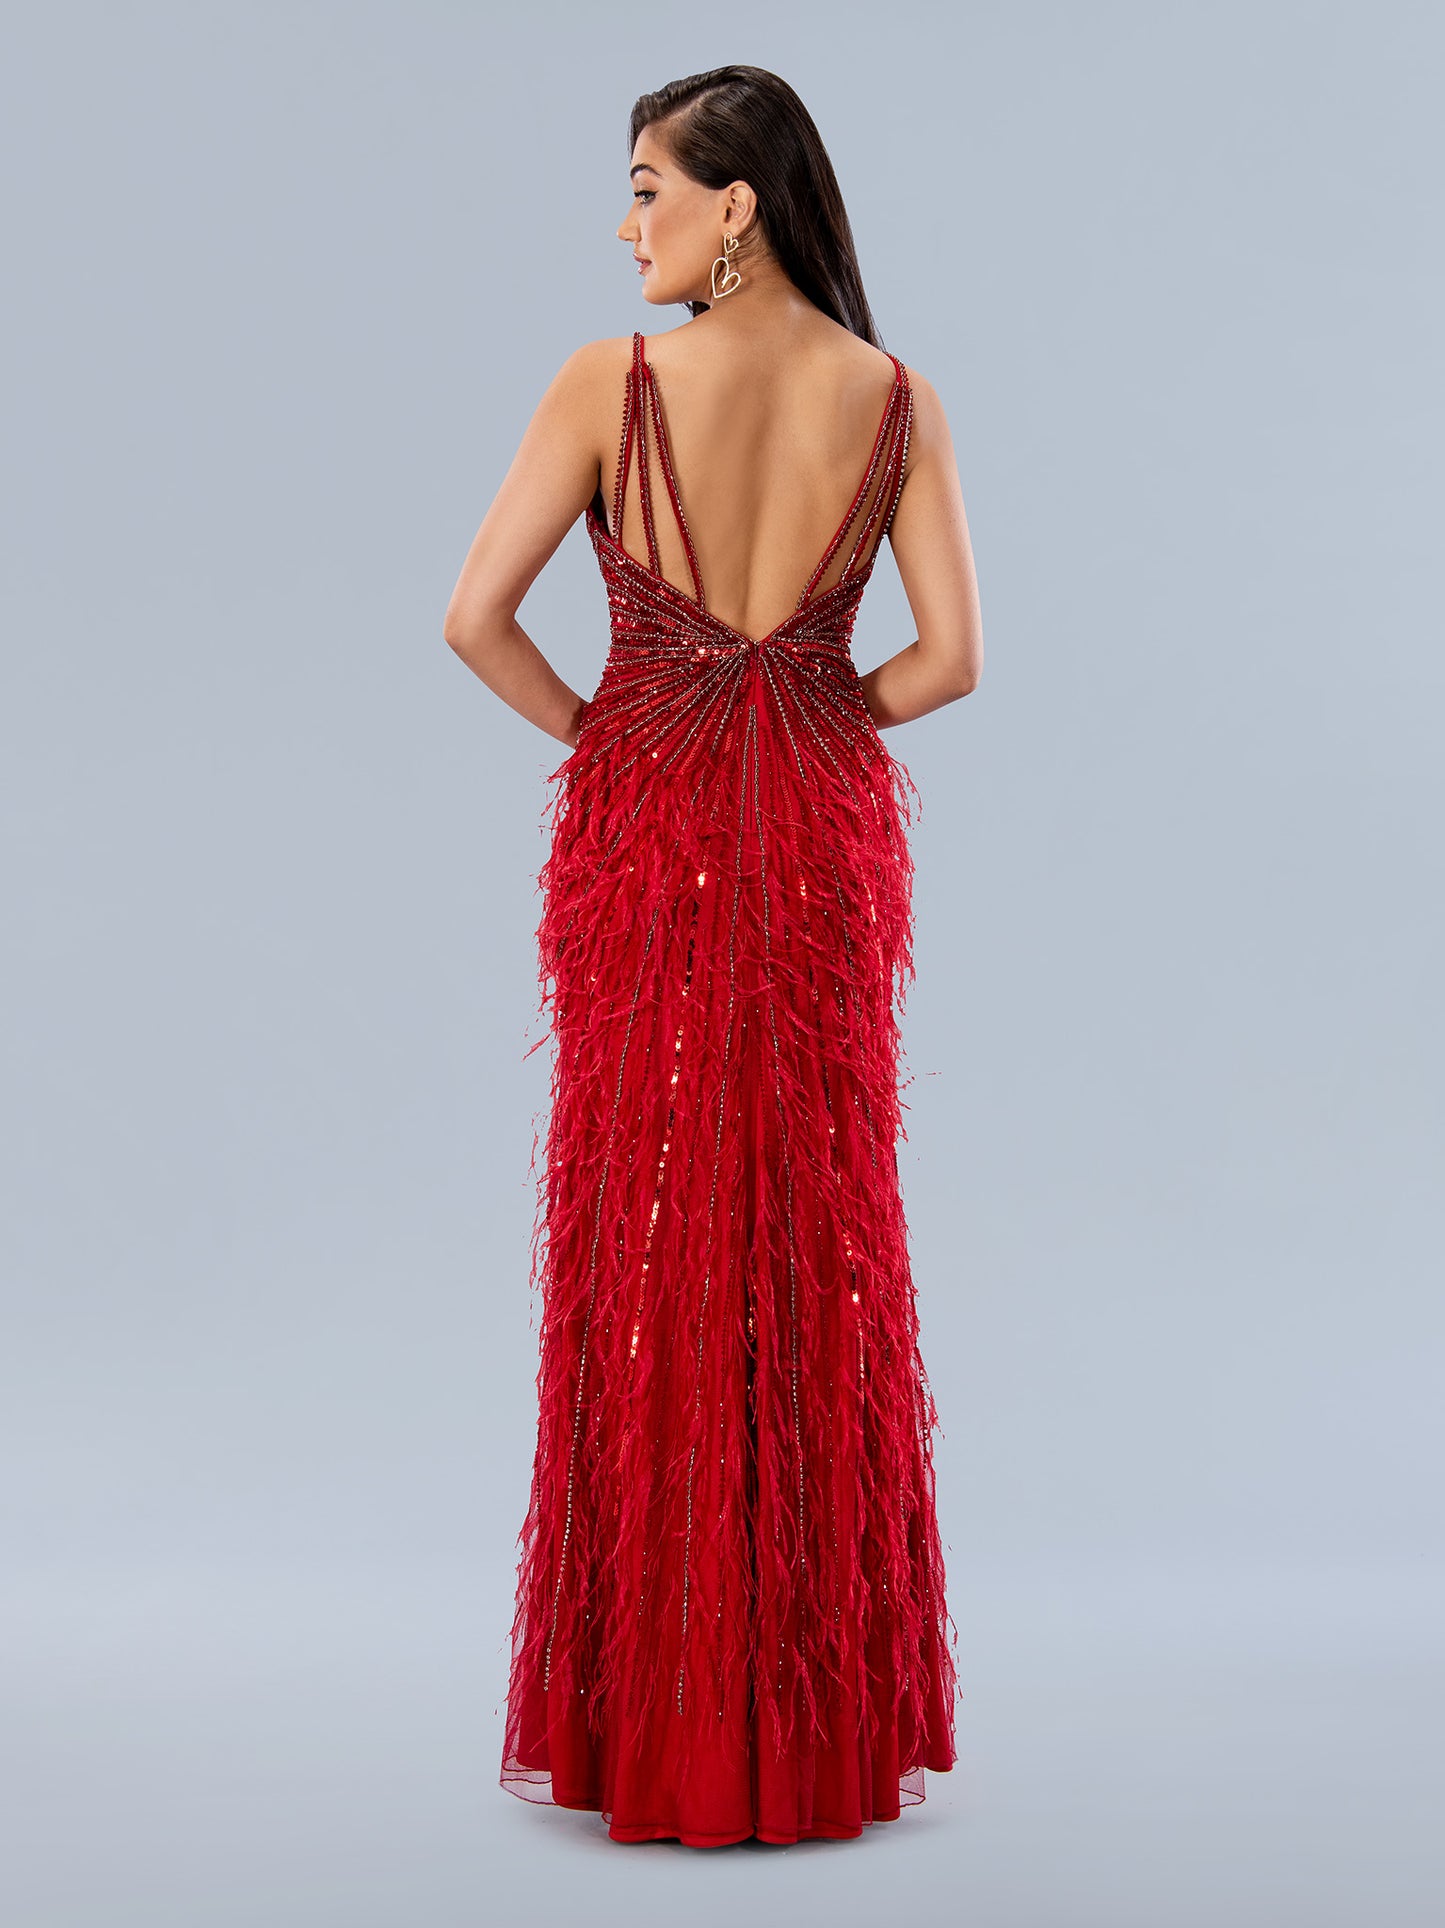 The Stella Couture 24206 Long Beaded Feather Prom Dress is an utterly glamorous evening gown. Crafted from high-quality sequins and adorned with intricate beaded feathers, this show-stopping piece ensures you'll turn heads. The added side split adds a touch of drama, making it the perfect dress for your special occasion.  Sizes: 0-16  Colors: Black, Off White, Wine